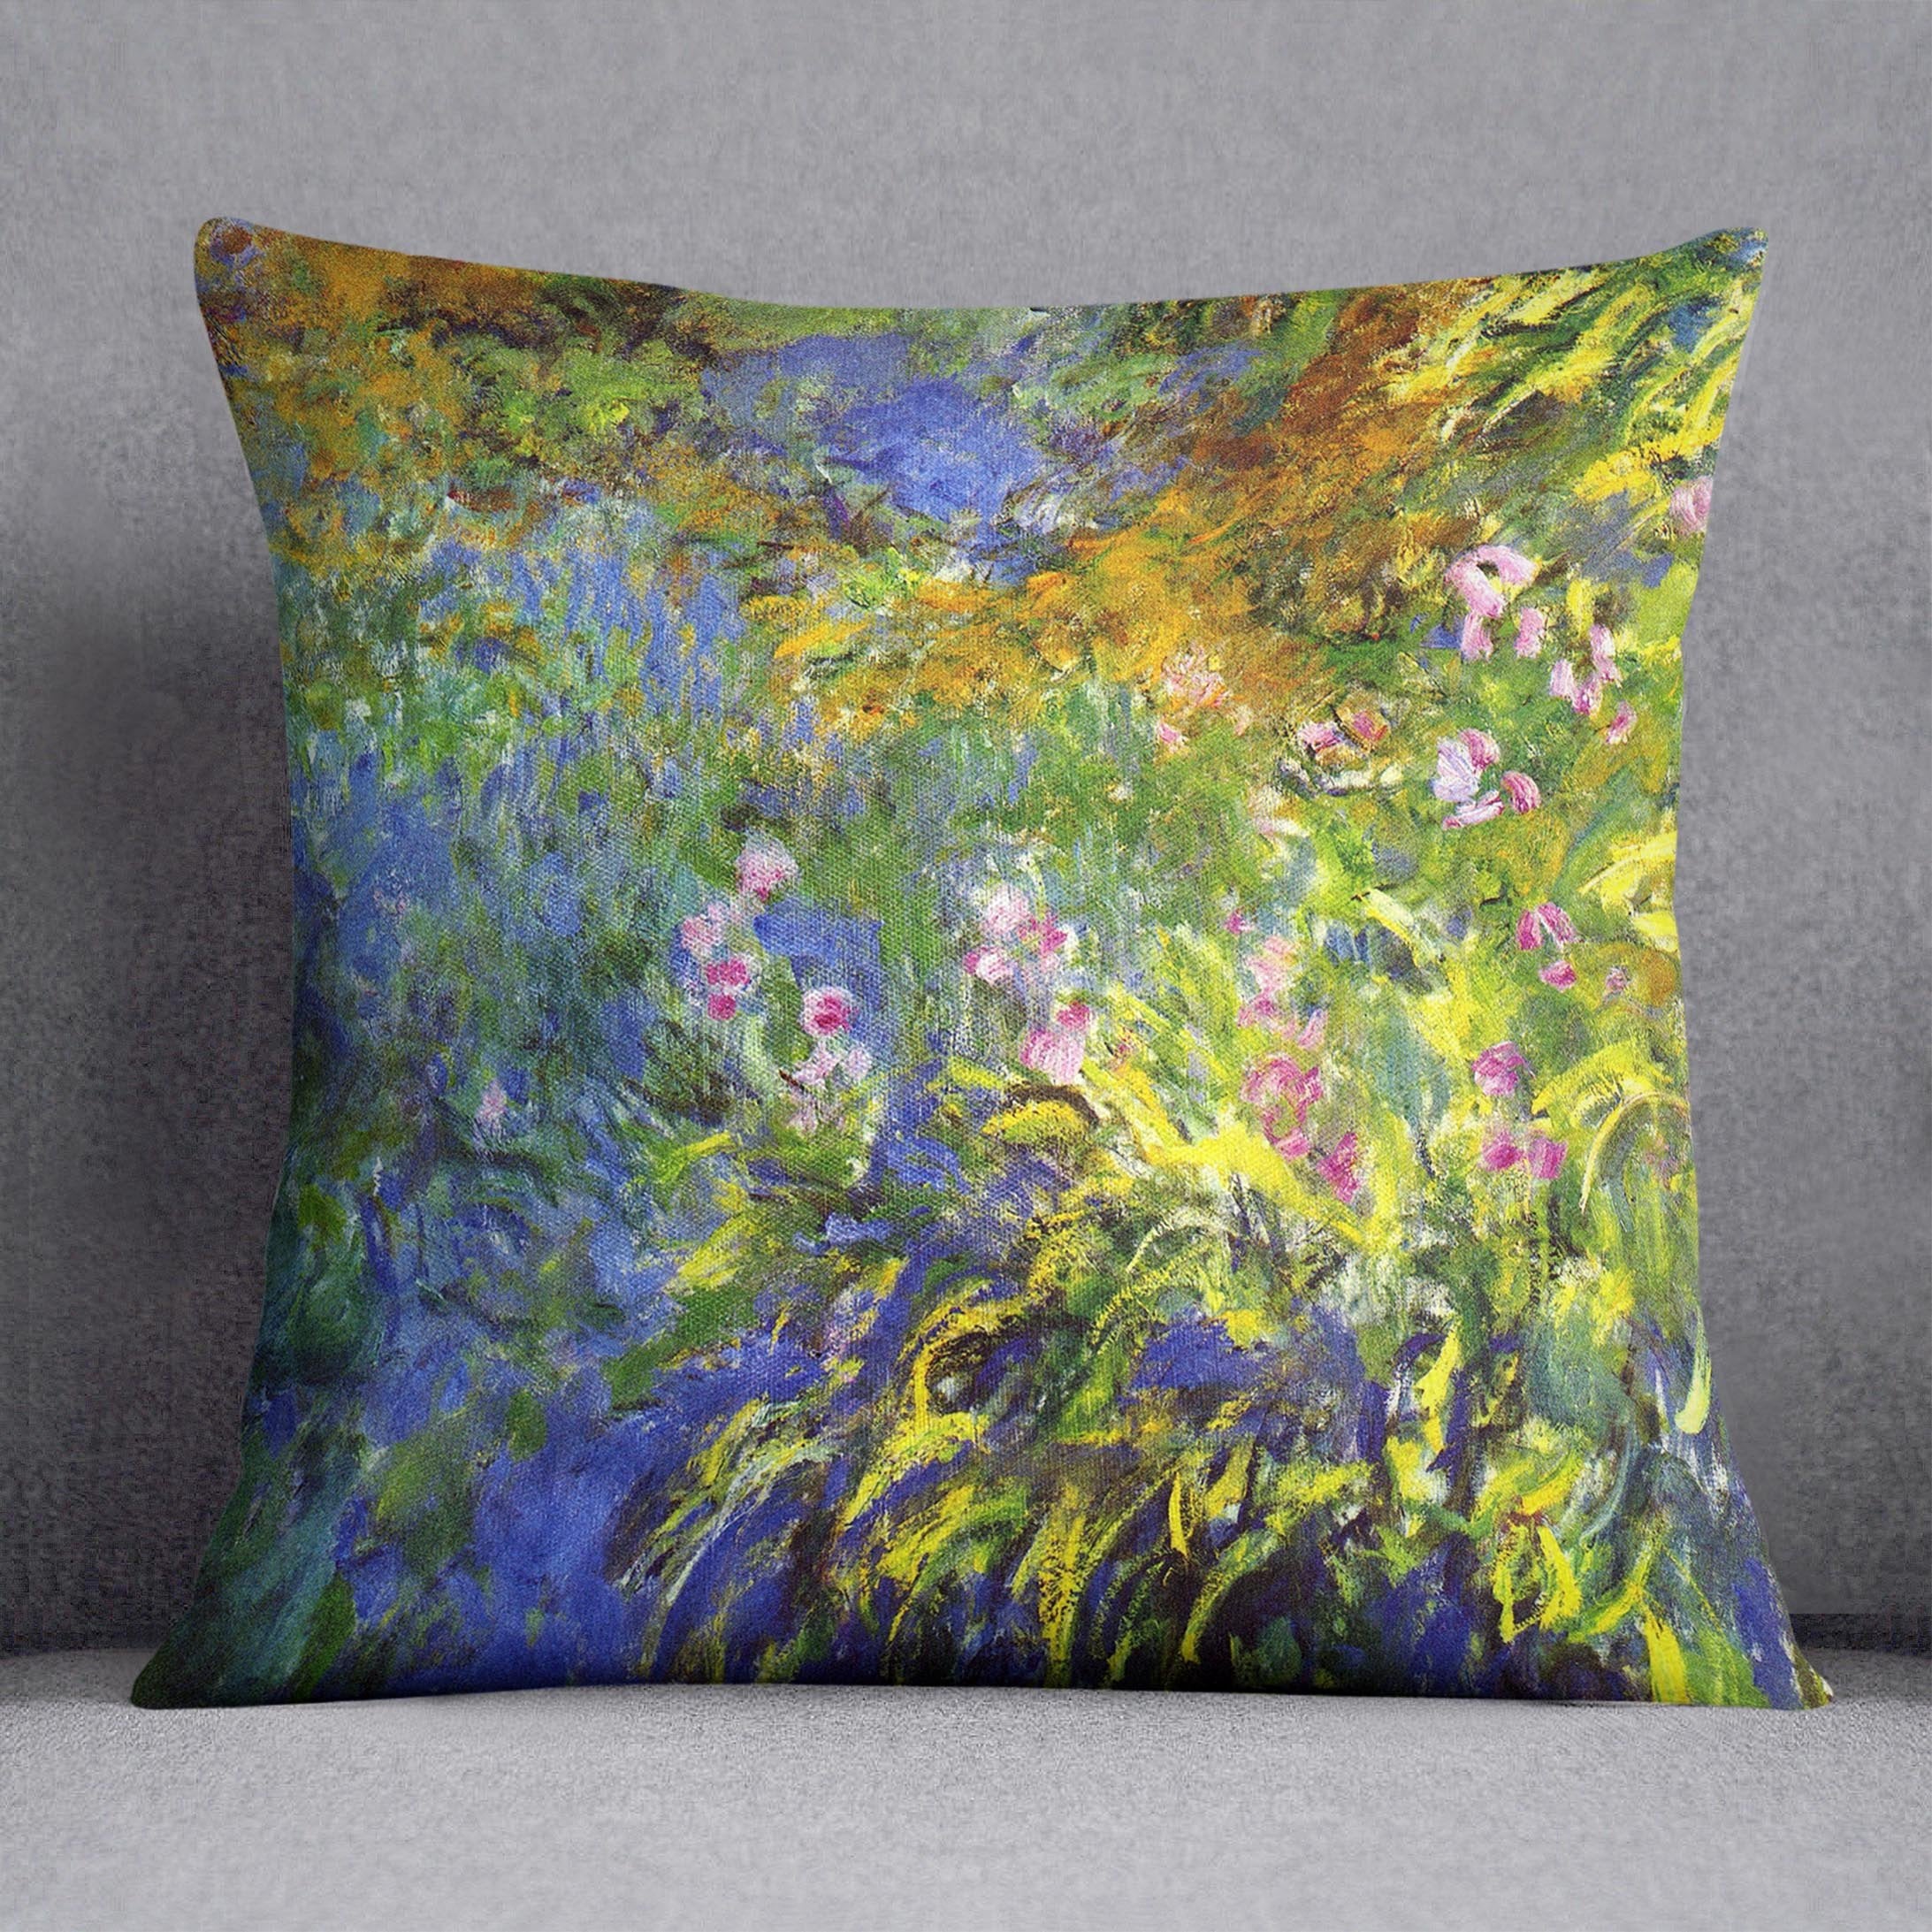 Iris at the sea rose pond 2 by Monet Throw Pillow